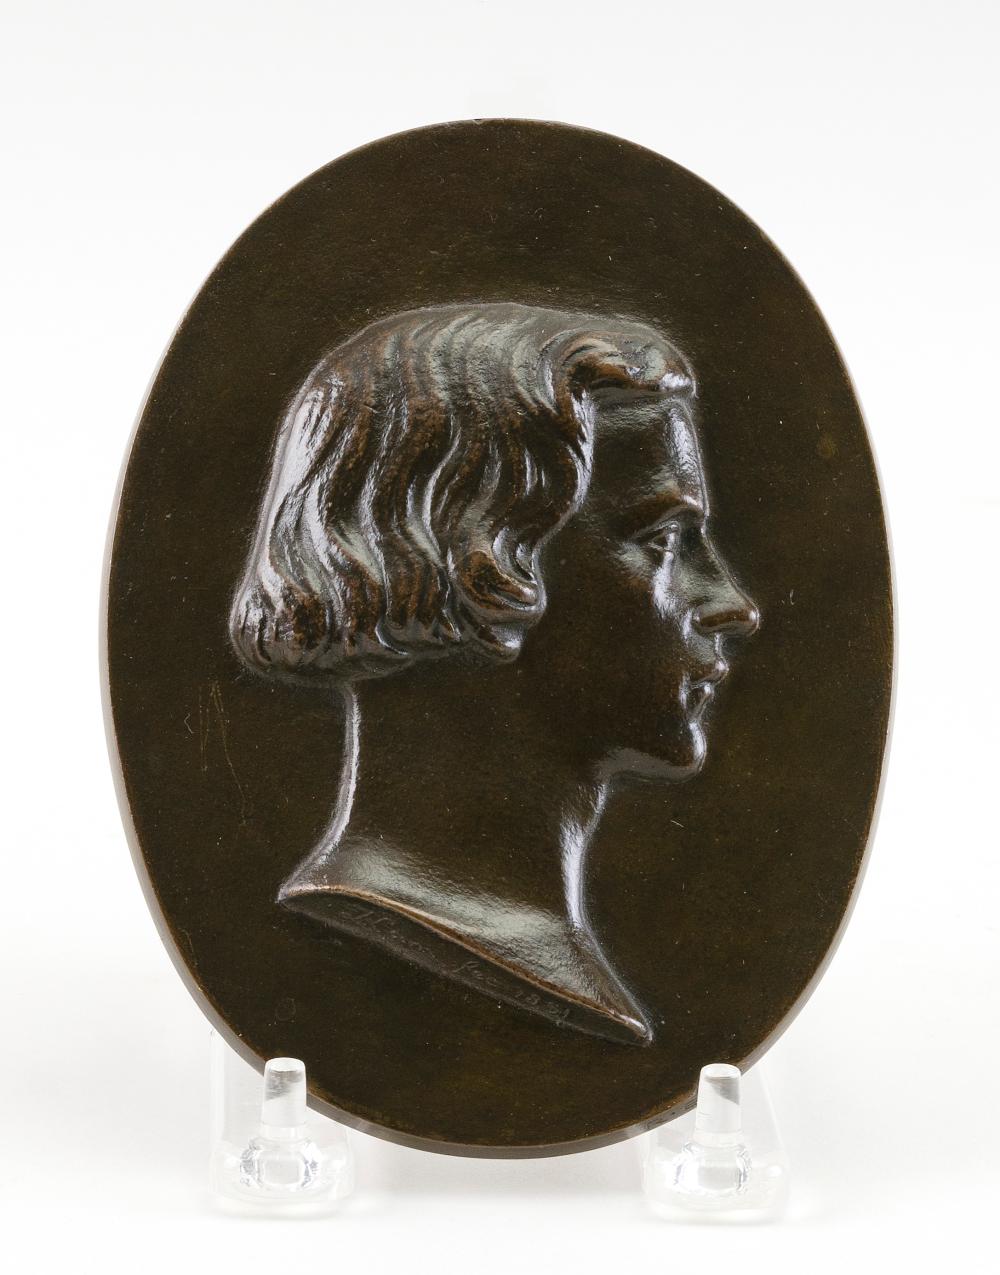 OVAL BRONZE PLAQUE DEPICTING A